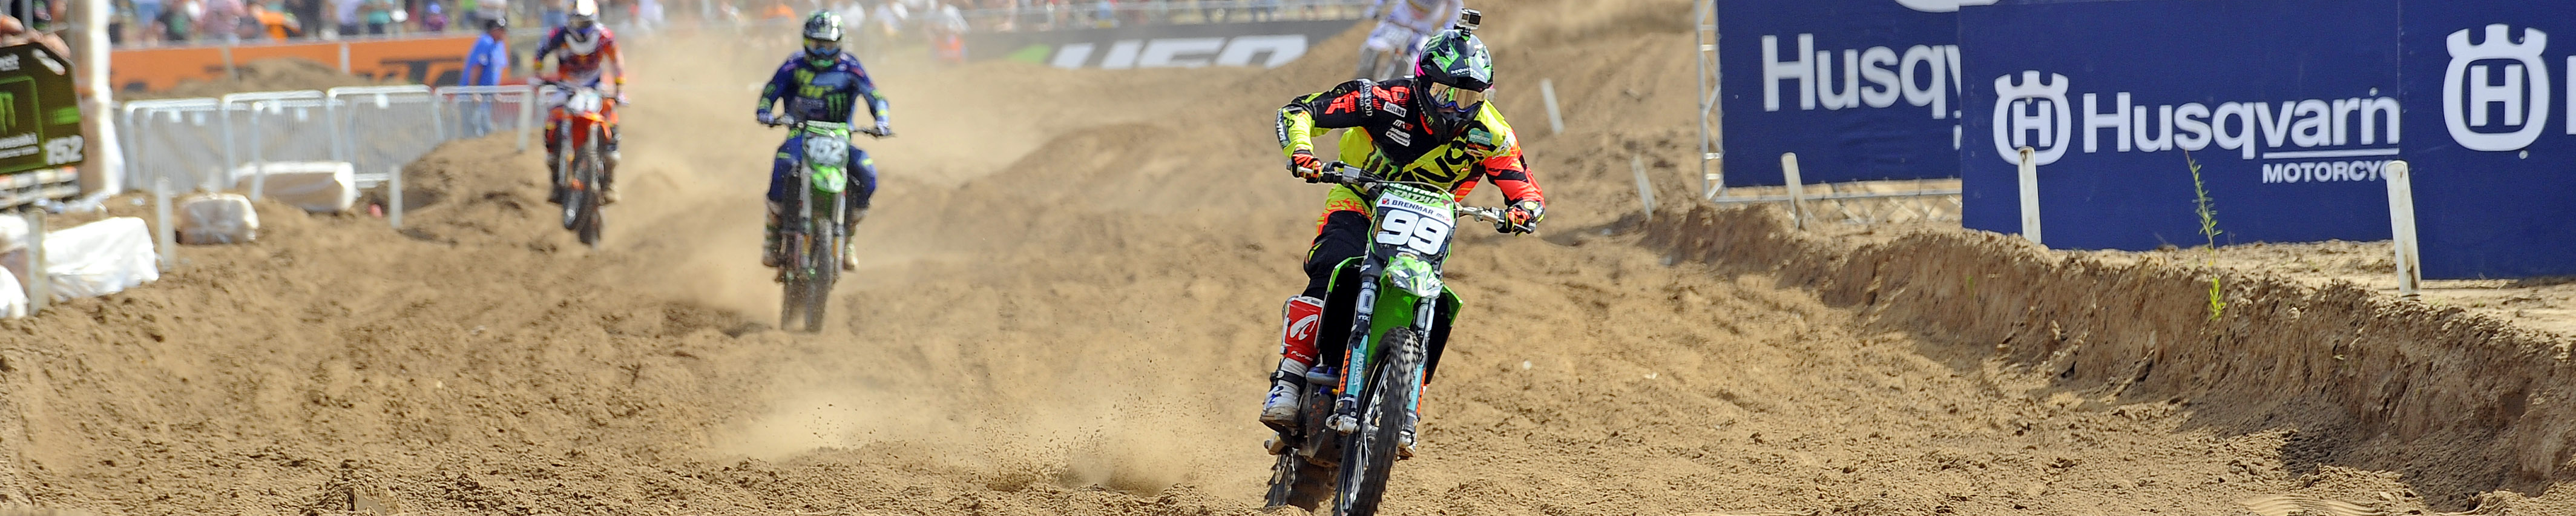 Maxxis tops the podium with Max Anstie